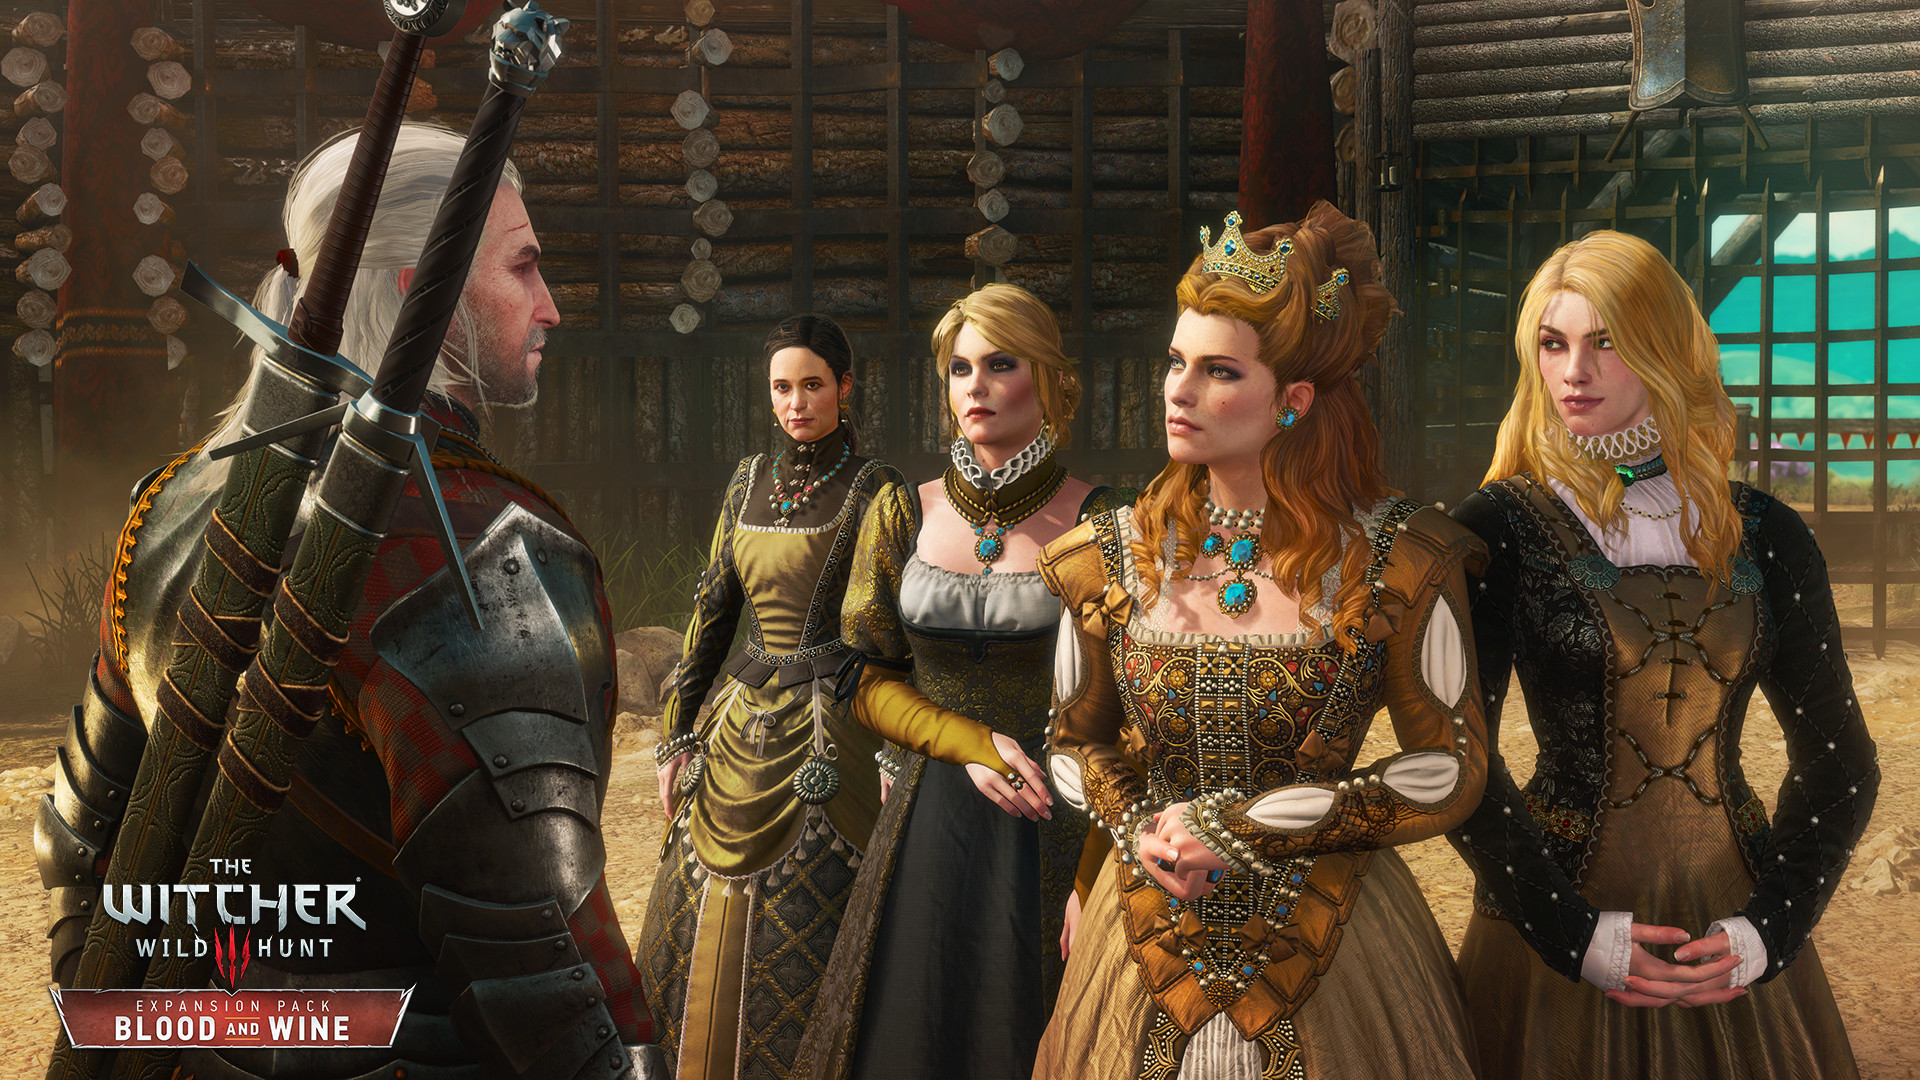 The Witcher 3: Wild Hunt - Blood and Wine Images 